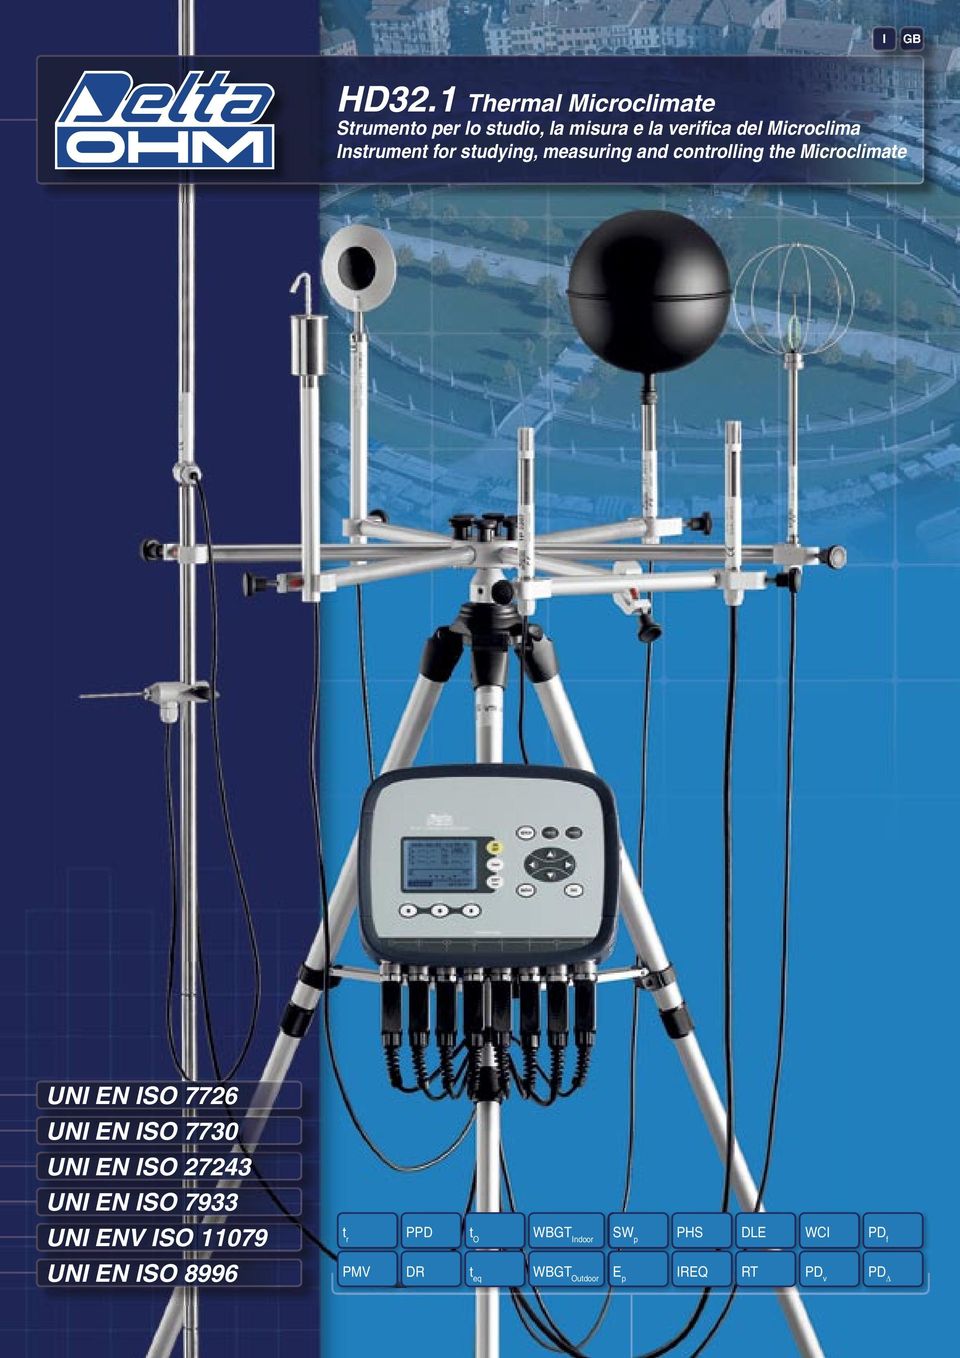 Instrument for studying, measuring and controlling the Microclimate UNI EN ISO 7726 UNI